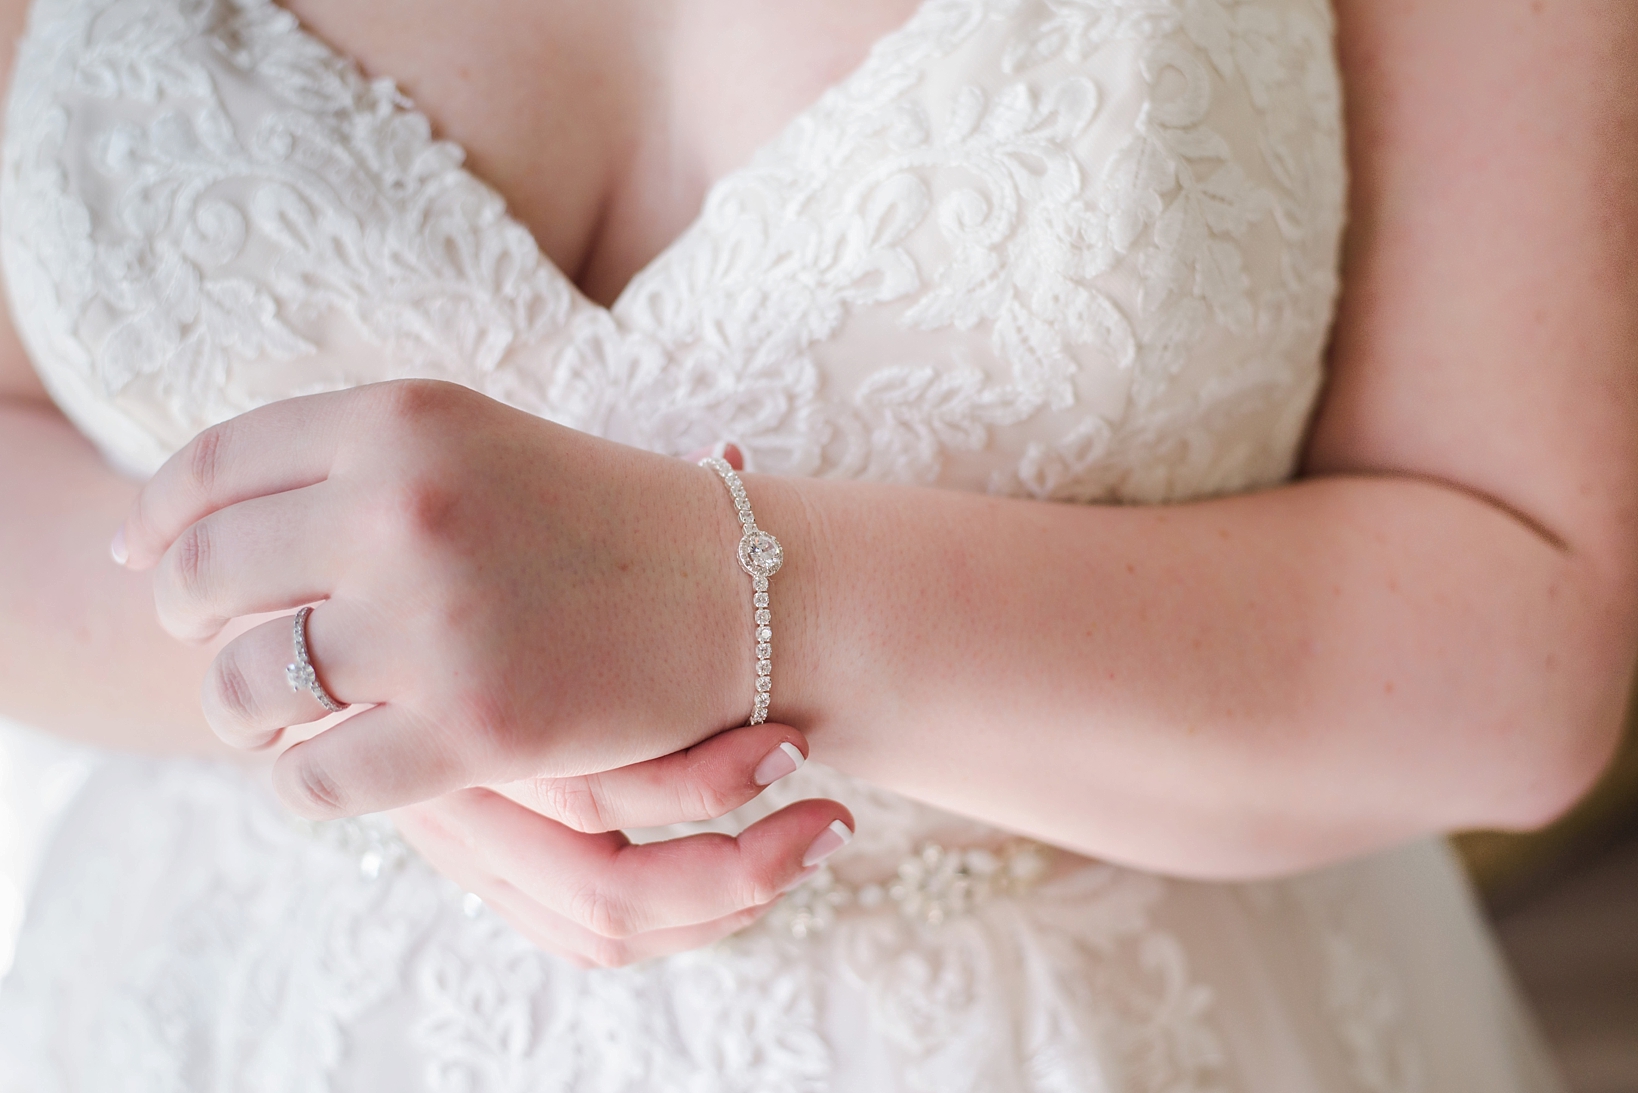 Bridal jewelry against the white lace of the wedding dress